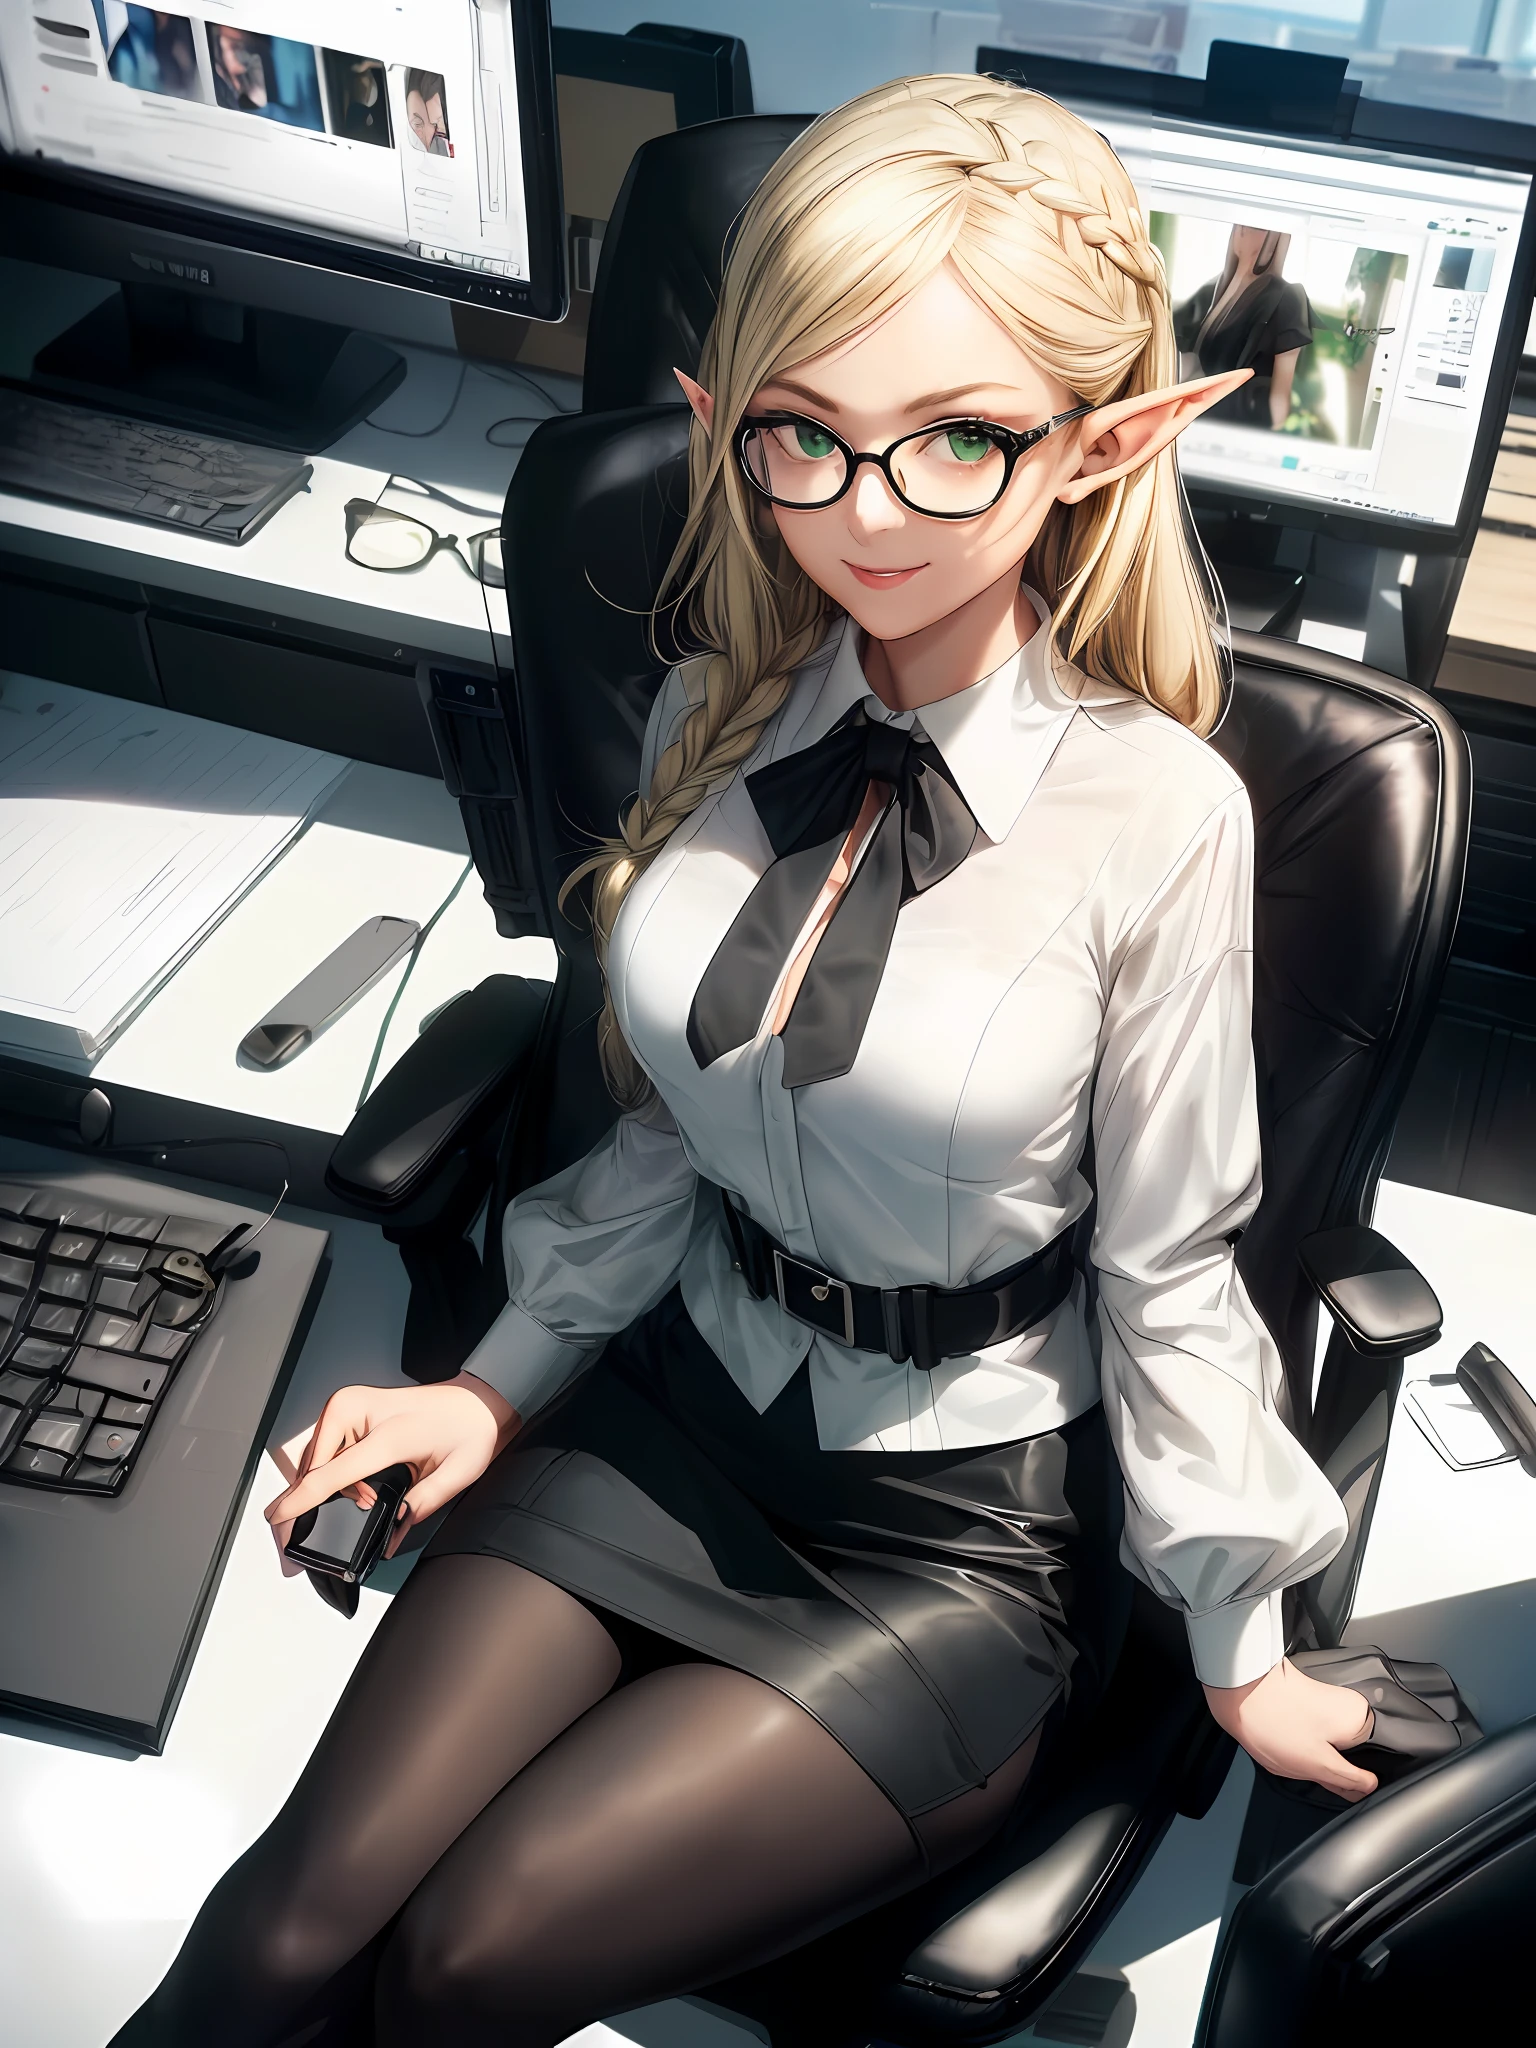 (((Masterpiece, top quality, precision, ultra-detail)))), ((Modern)), ((Elf OL))))), (Elf ears))), break, (((White blouse)), break, (Black and pencil skirt)))), break, (((Black over-the-knee tights))))), (Blonde long braid hair), (Glossy big green eyes)))), (((Big)) ), ((Design office)), (((PC on a stylish office desk))), break, ((Sitting in a black office chair))))), Smile, ((Glasses))), (Tilts head)))), Breeze, (eye forcus)), Dynamic angle, from above